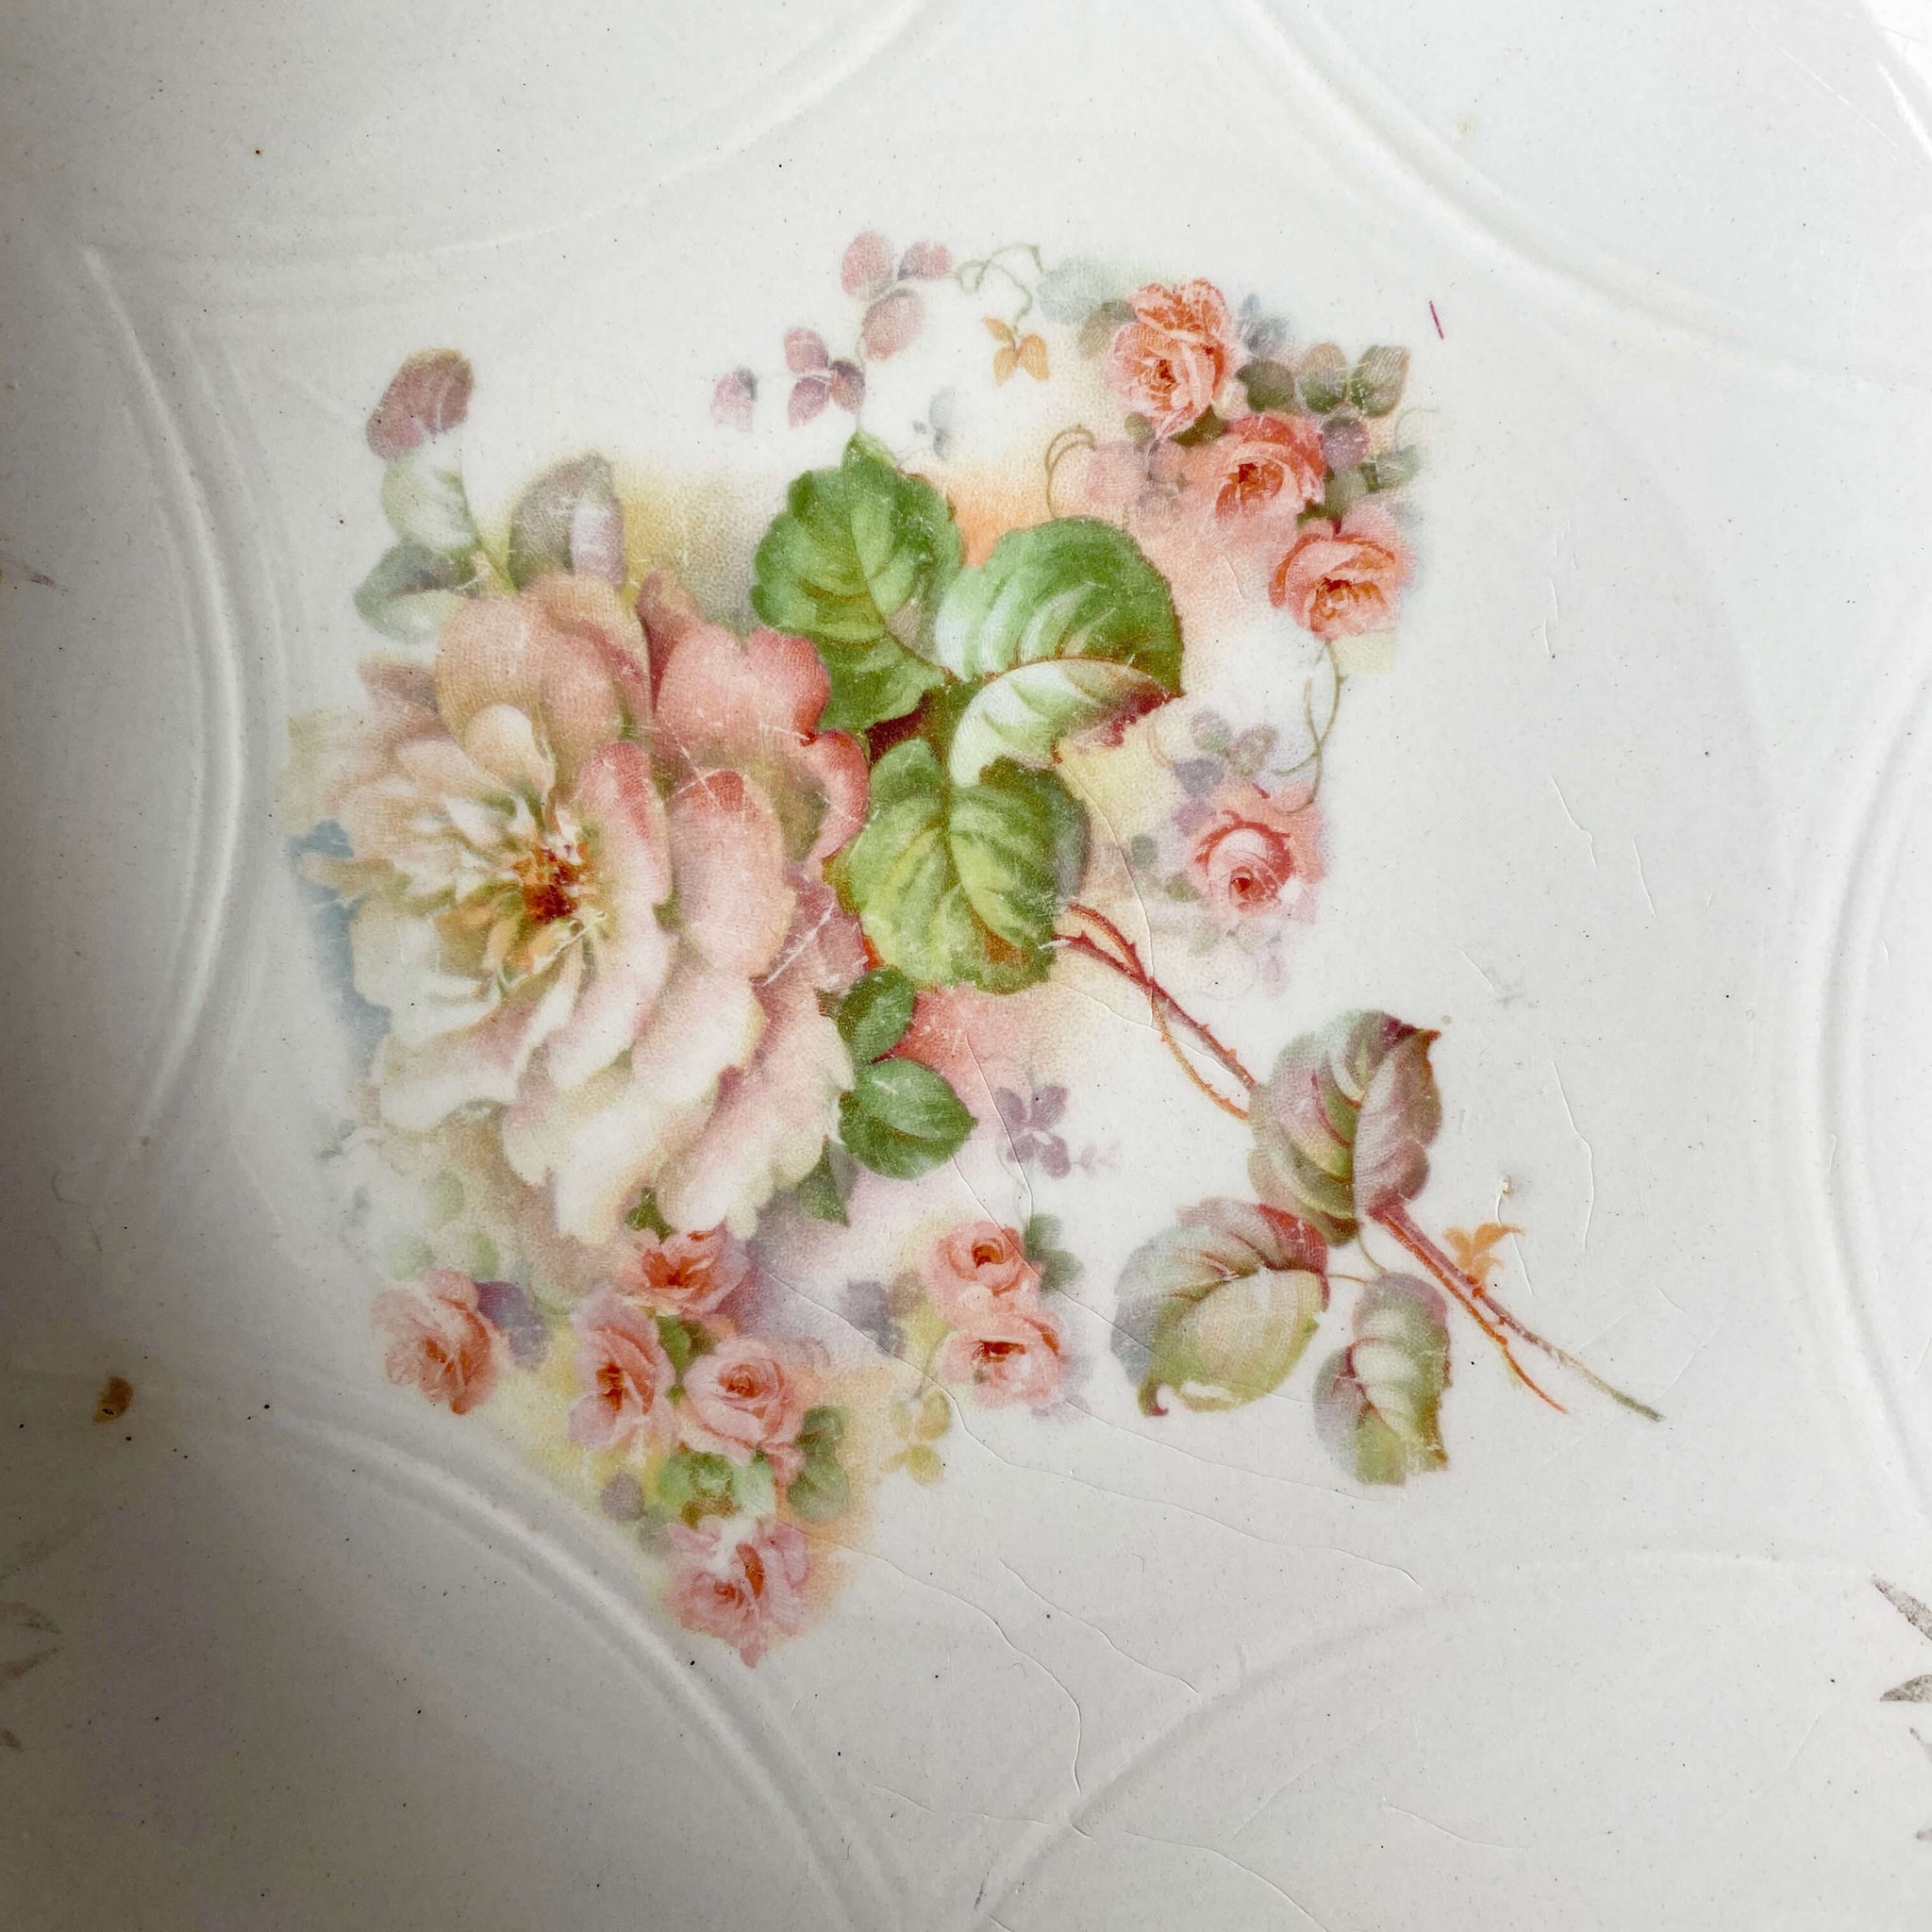 Antique White Serving Bowl with Pink Roses and Gold Monogram Designs